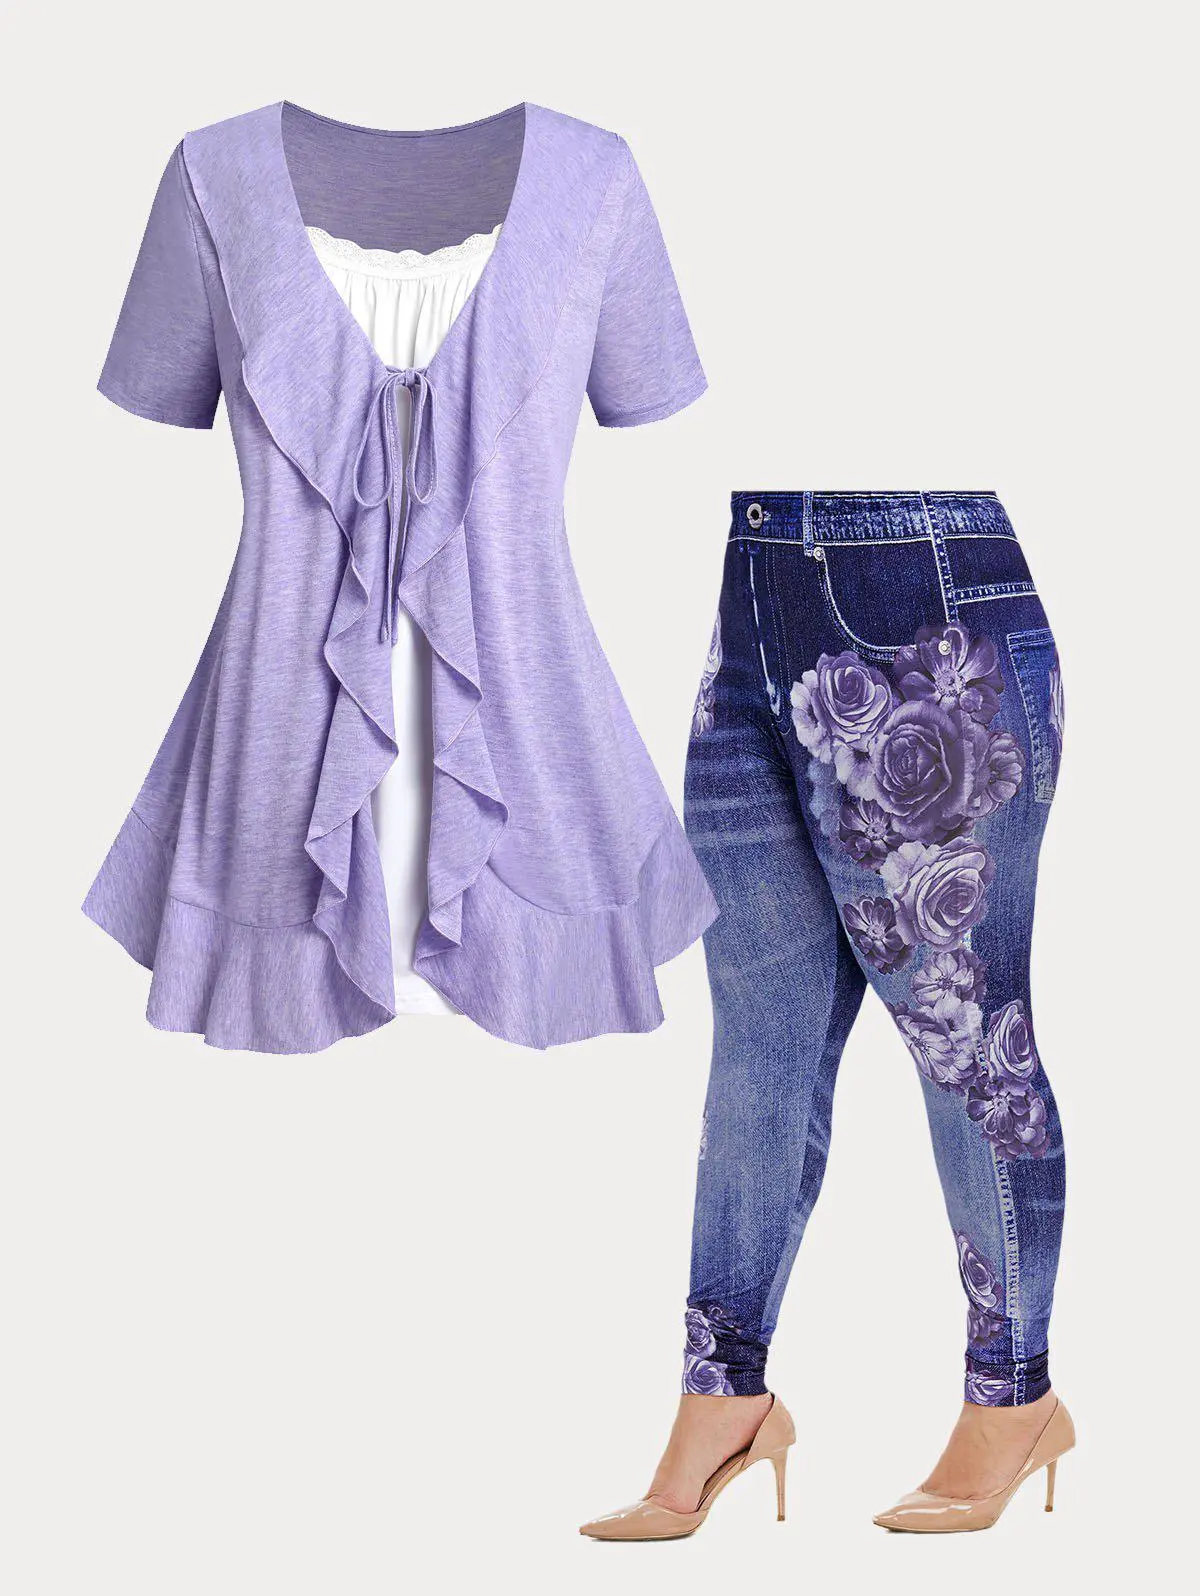 Lavender Ruffled 2 in 1 Tee and Floral Print 3D Jeggings Plus Size Summer Outfit